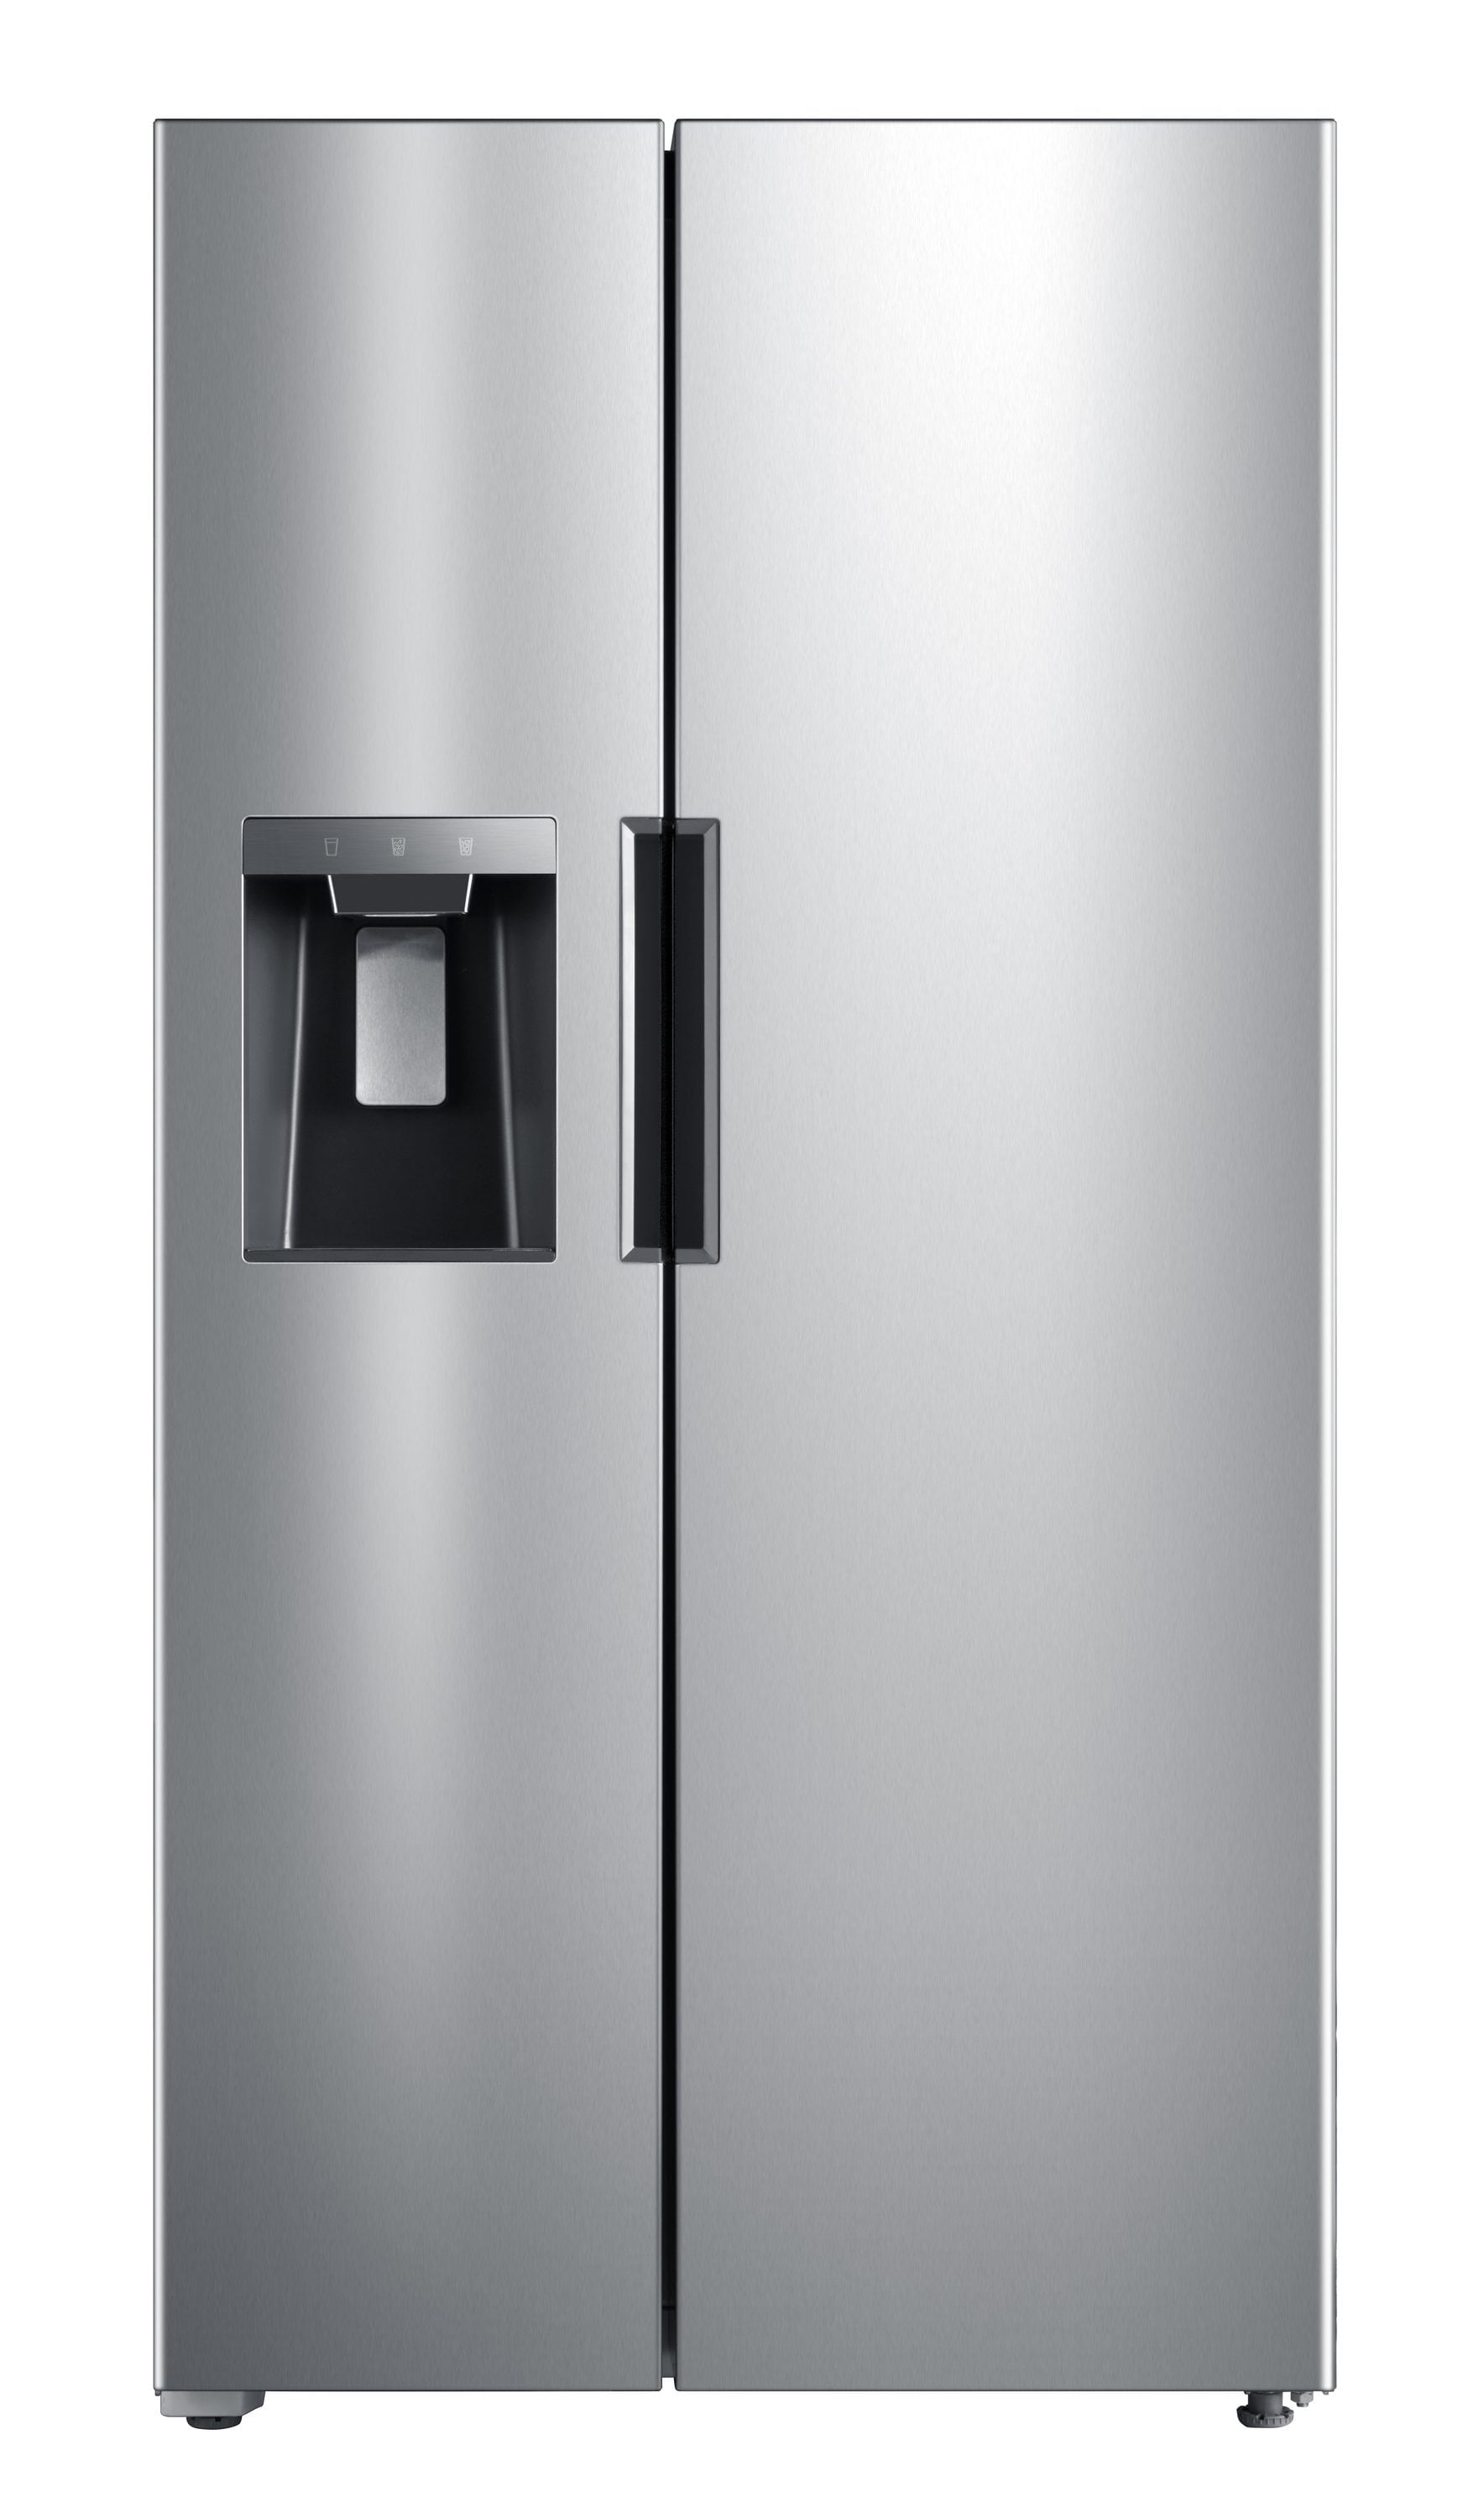 Midea 26.3-cu ft Side-by-Side Refrigerator with Ice Maker (Stainless ...